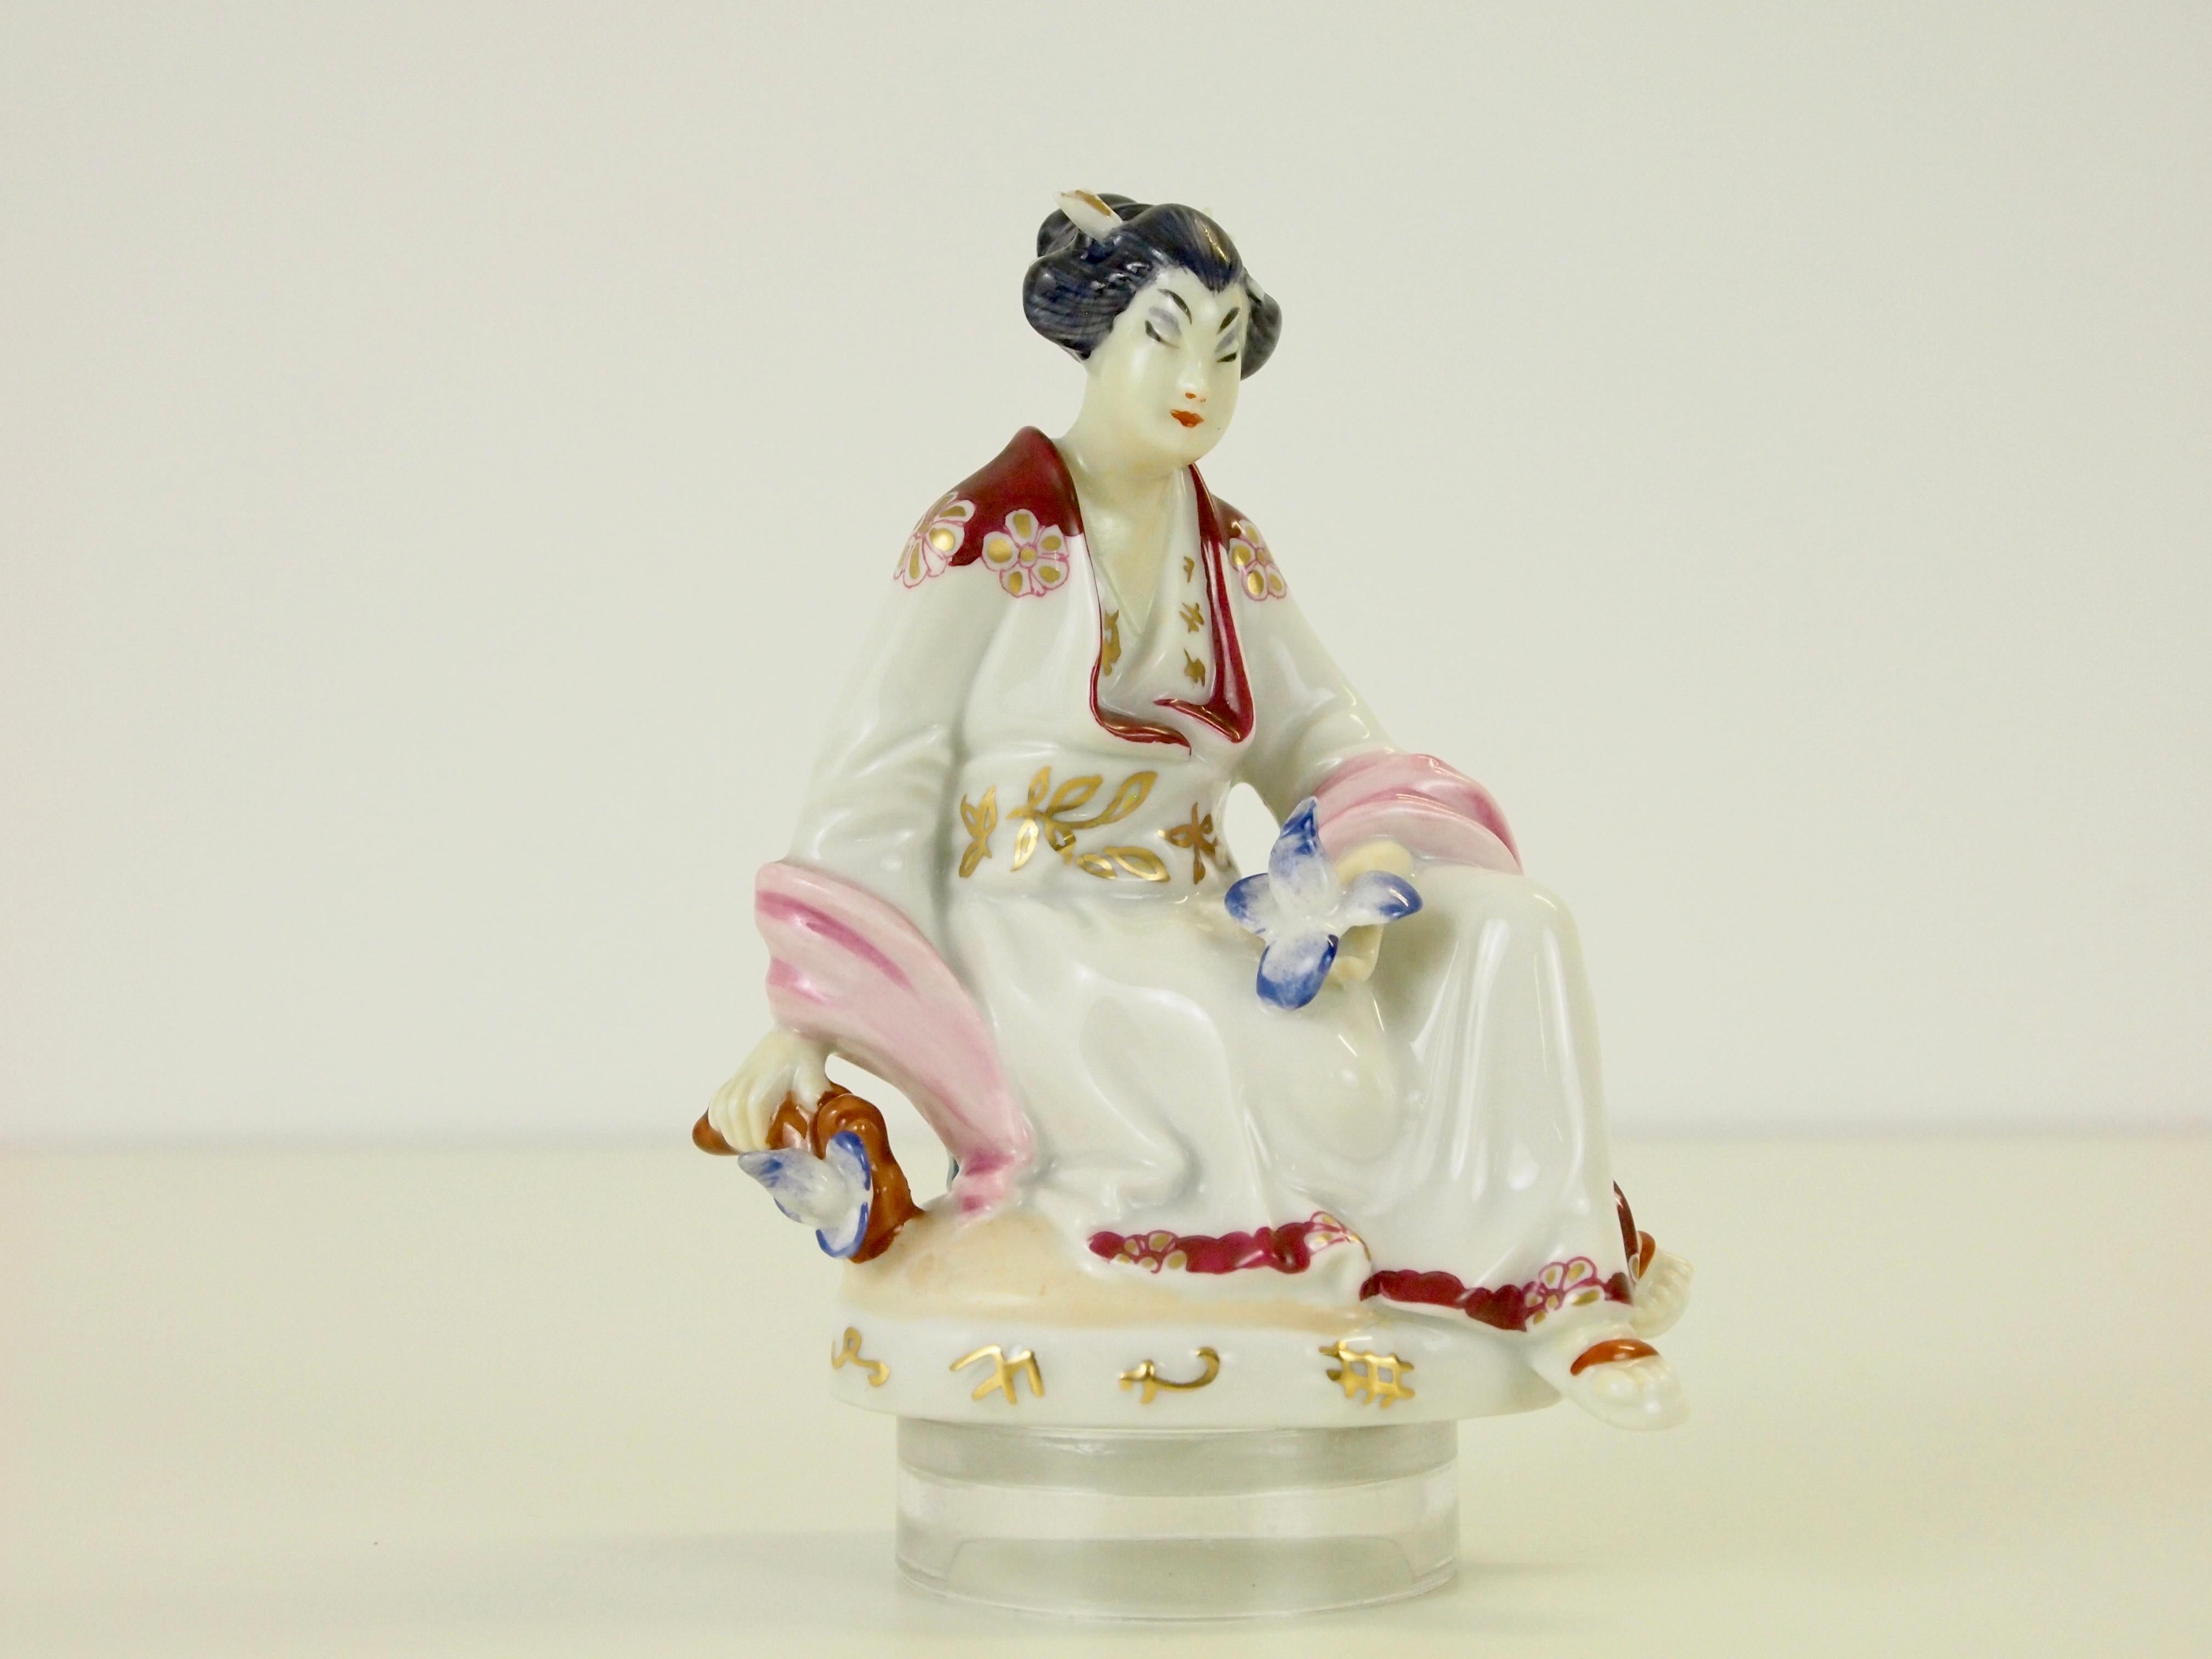 Delicate fine porcelain figurine depicting a Chinese woman.

This figurine was (like the other figurine depicting a Chinese man playing the flute) designed in 1926 by Mathilde Szendrö-Jaksch for Augarten Wien (Vienna). It is very well handcrafted